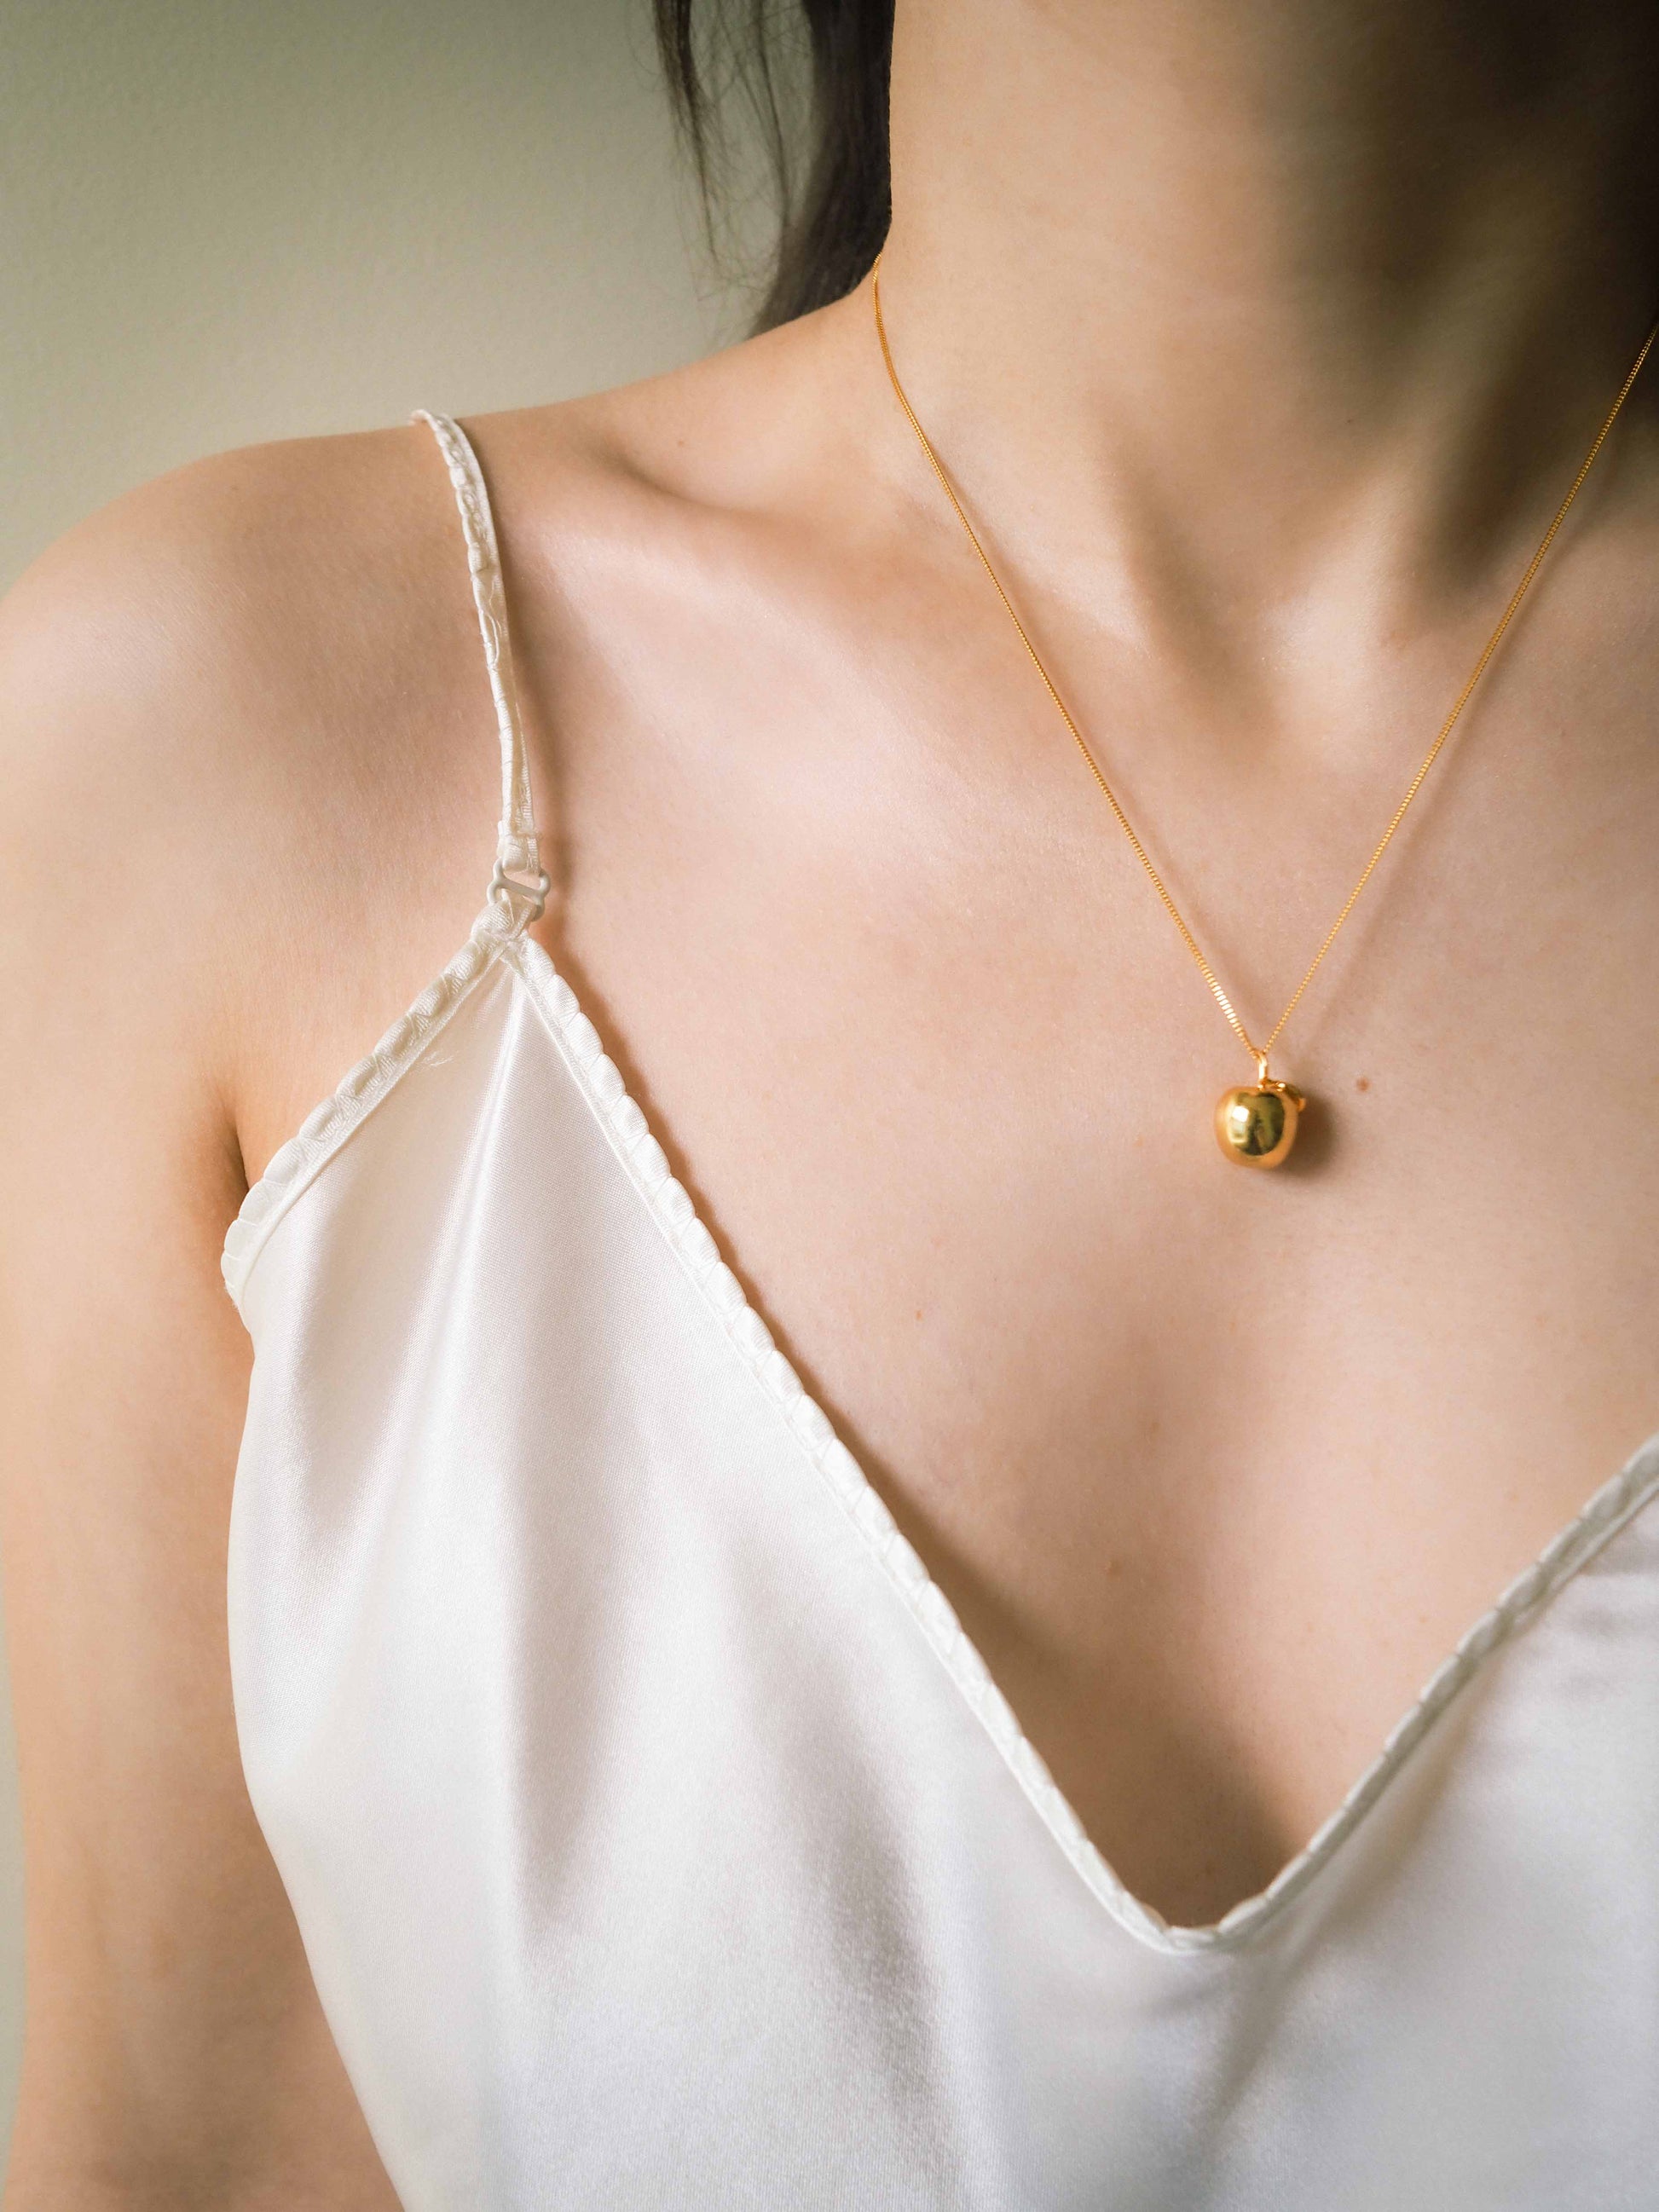 handmade gold plated apple pendant necklace on model's neck